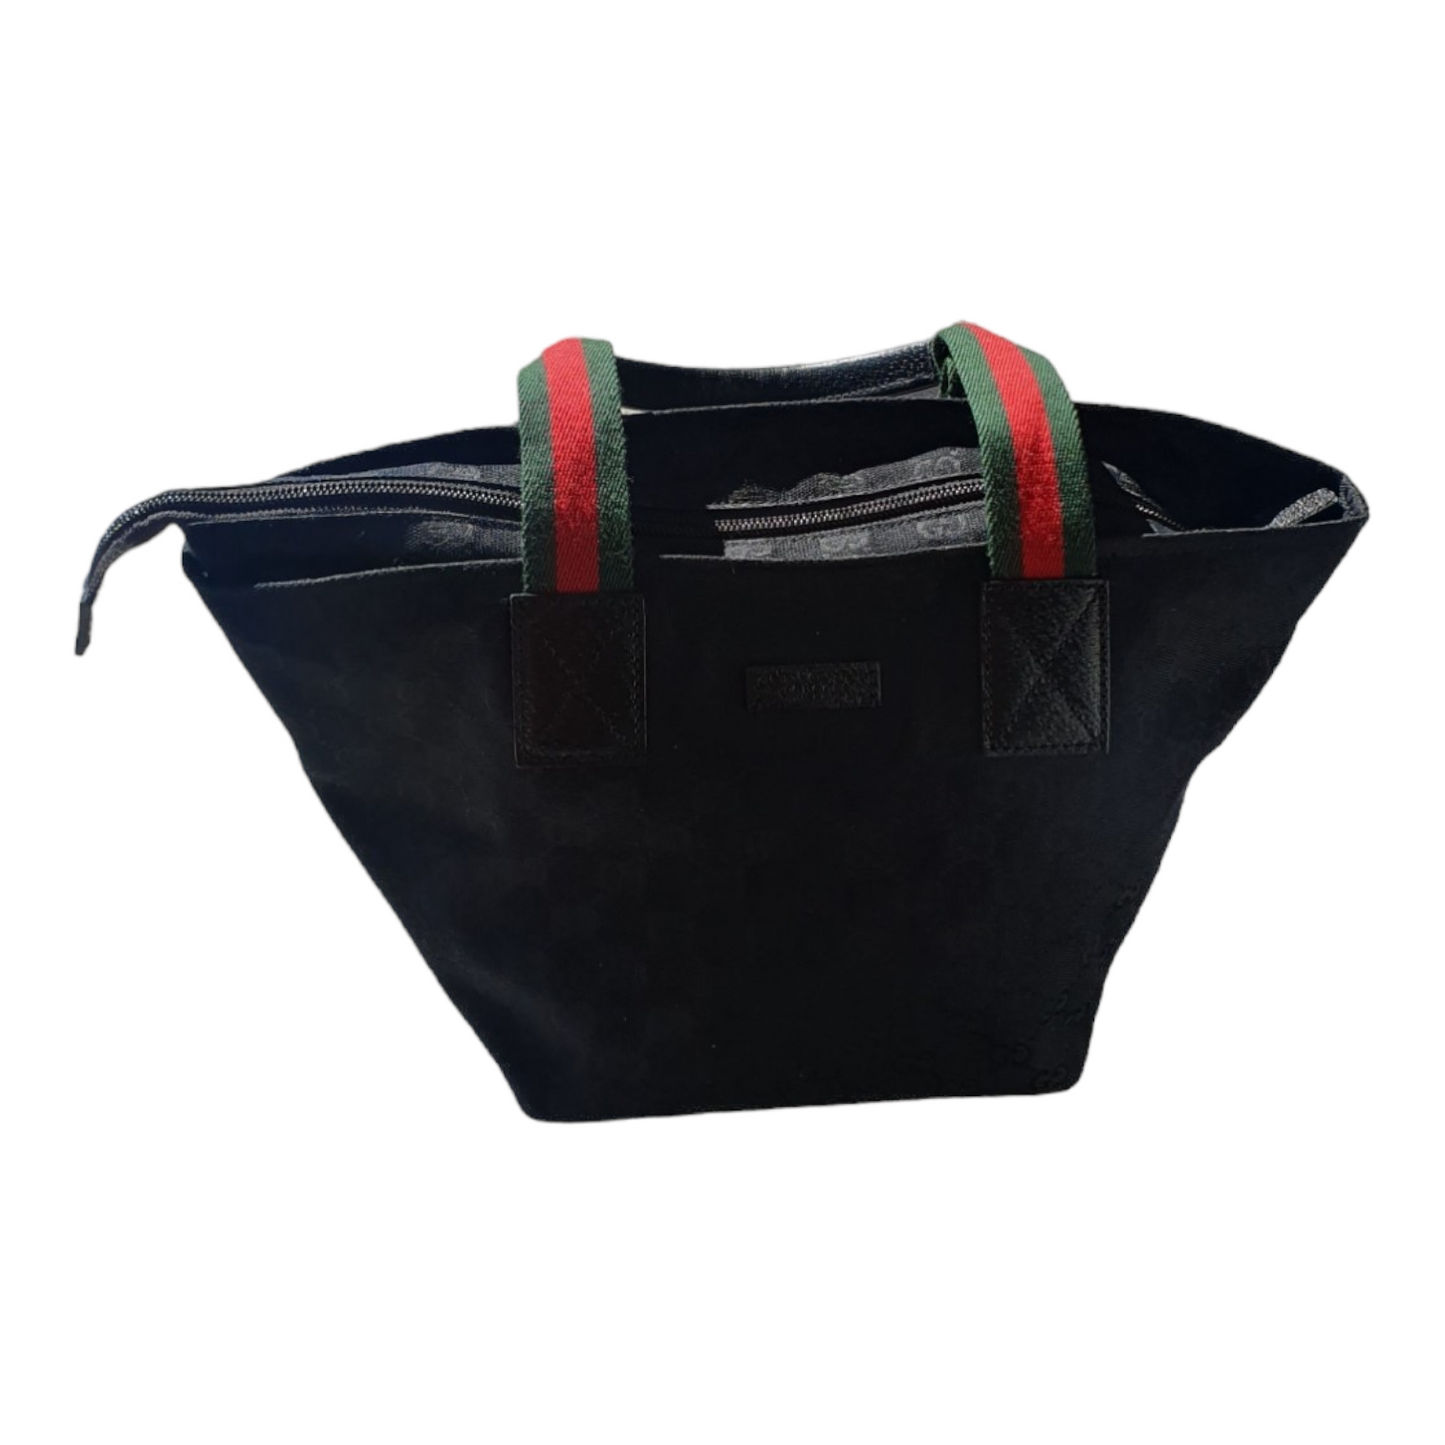 Gucci Ophidia logo black canvas and leather tote